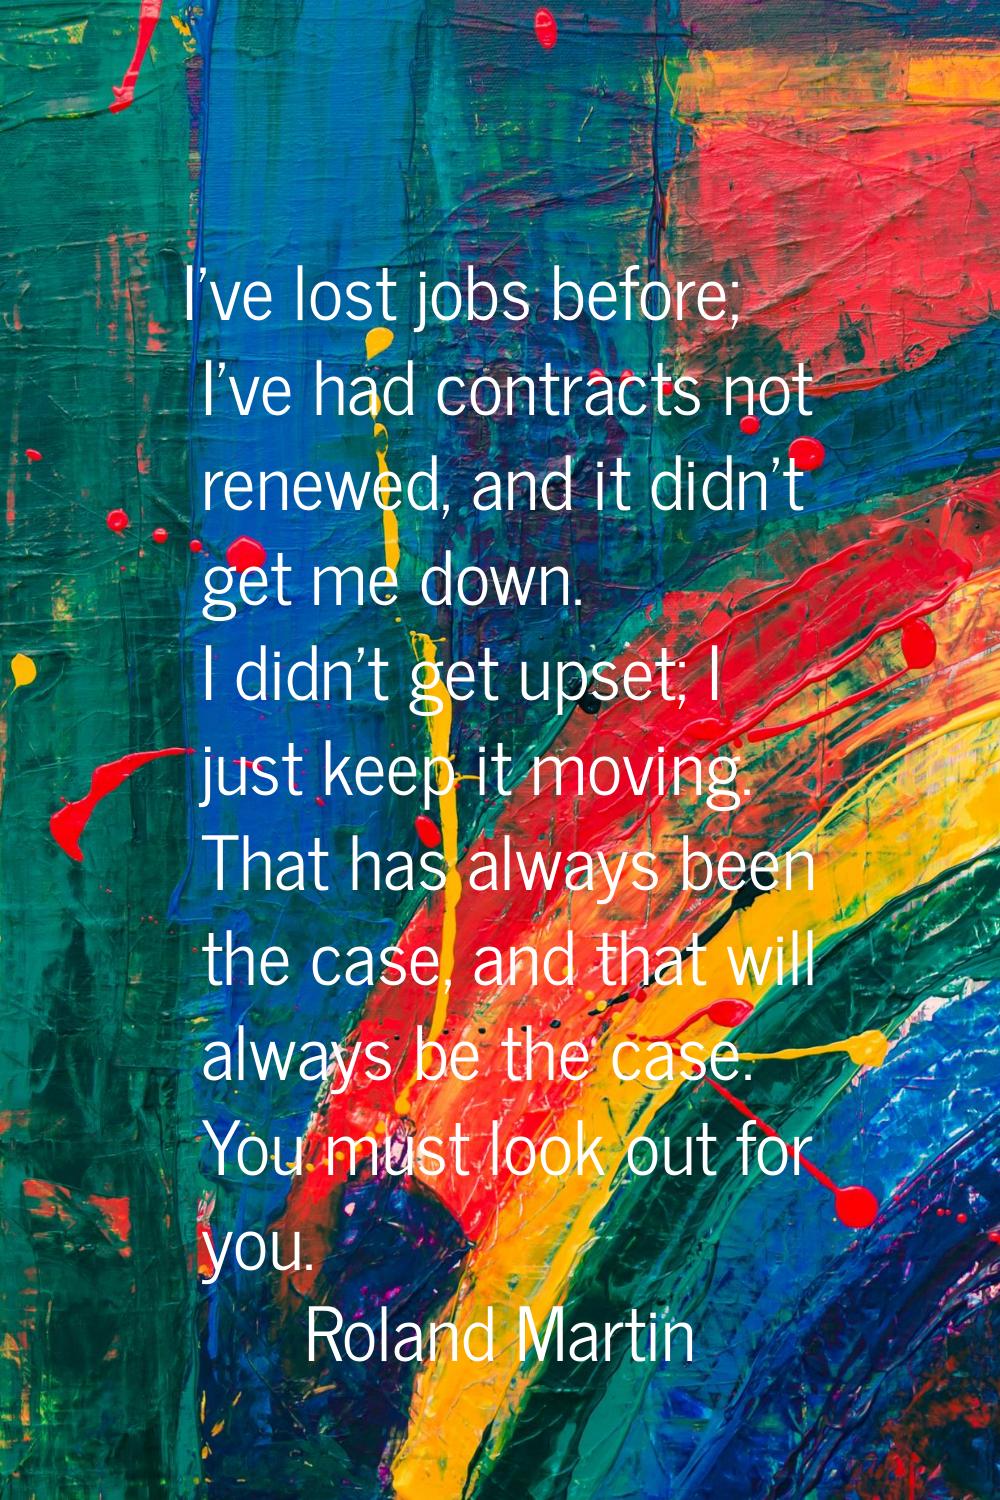 I've lost jobs before; I've had contracts not renewed, and it didn't get me down. I didn't get upse